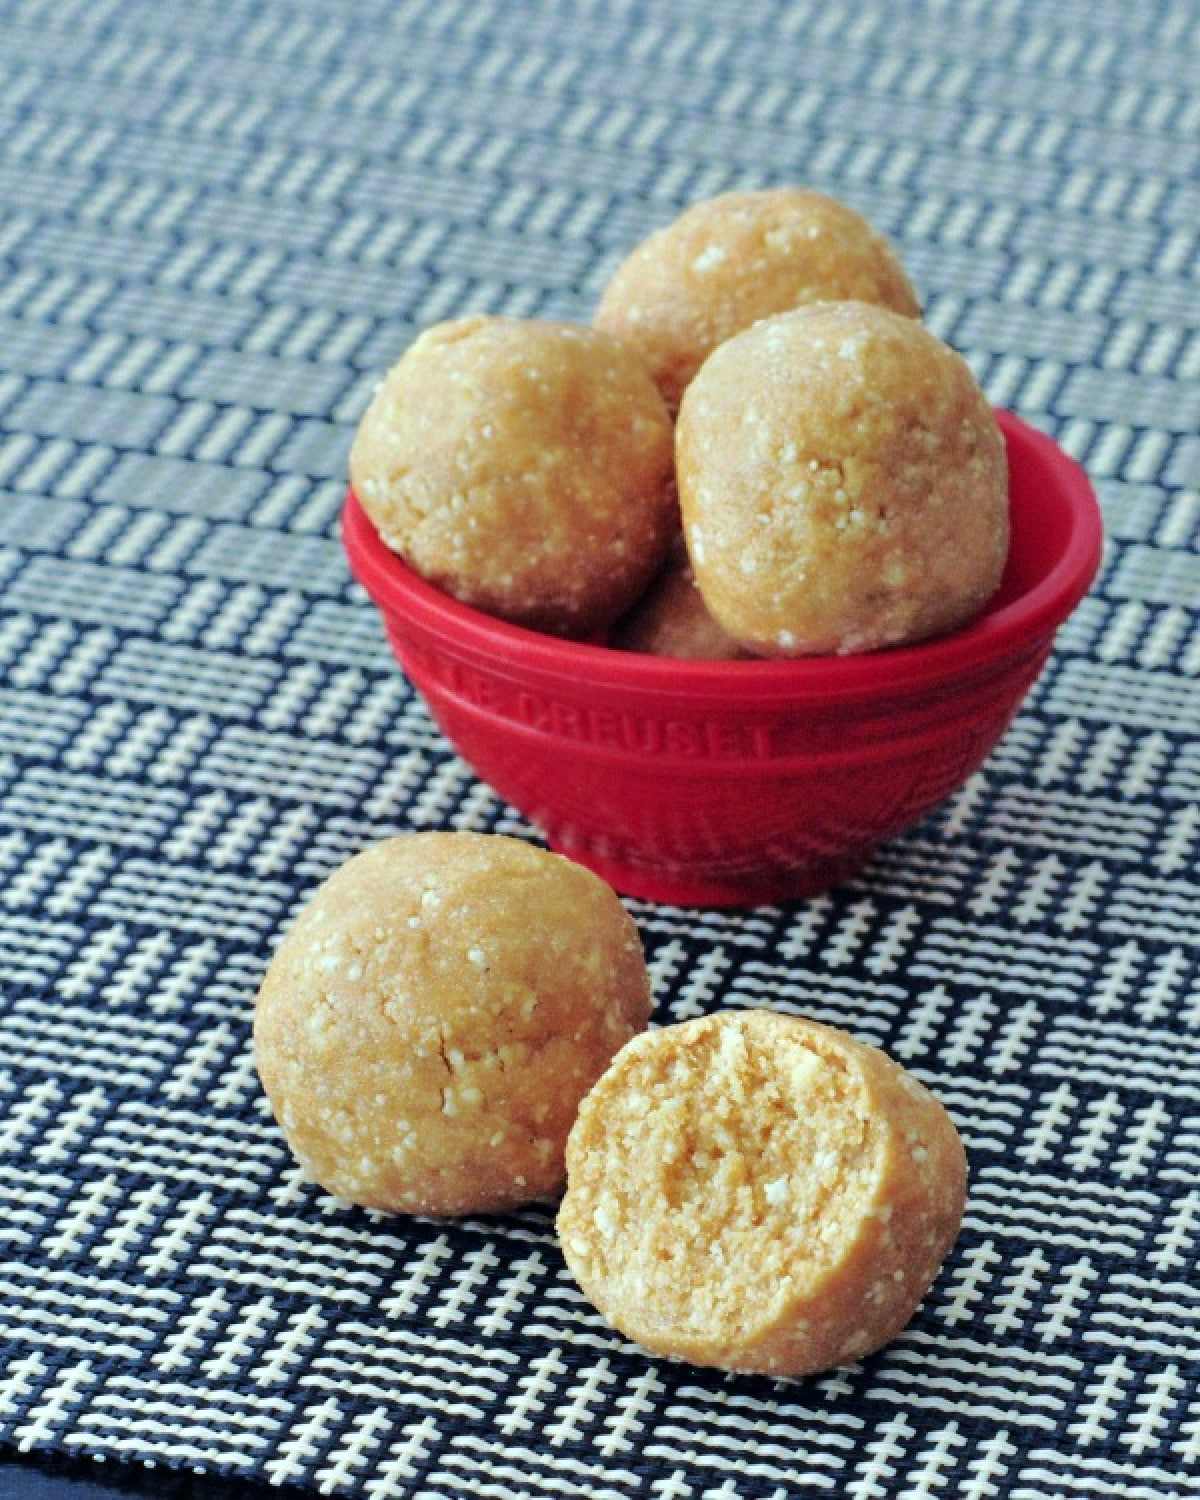 Small round orange creamsicle protein bites stacked in a small red bowl. two bites sitting outside the bowl, one with a slice out of it.